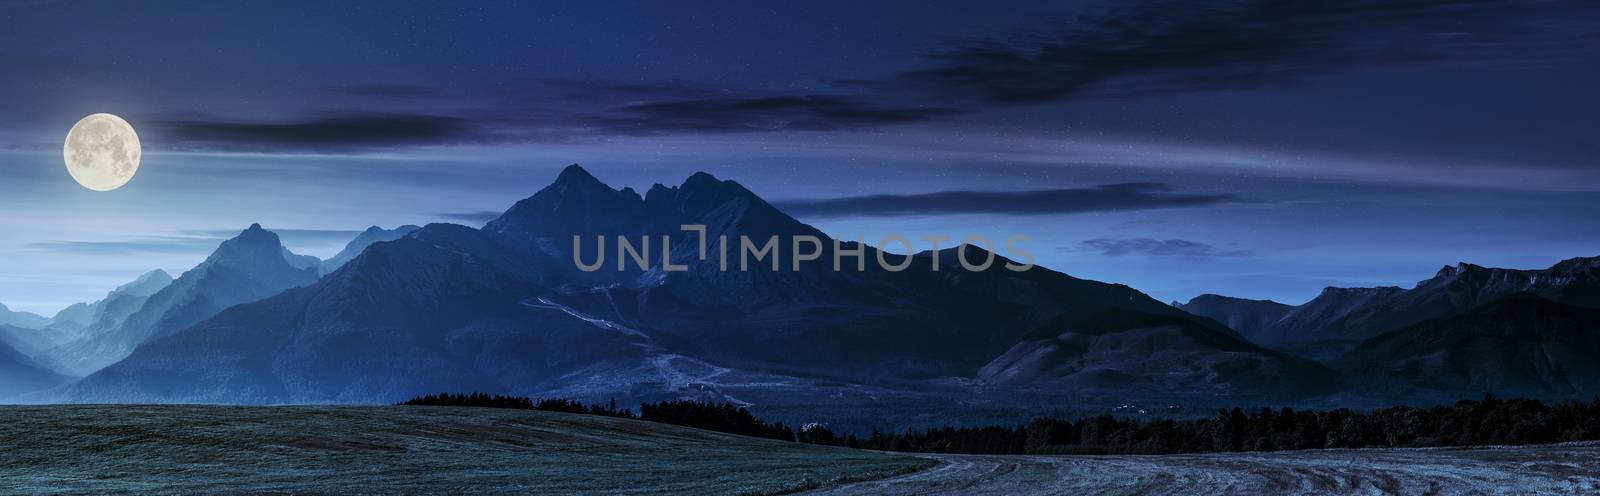 rural field in Tatra mountains at night by Pellinni